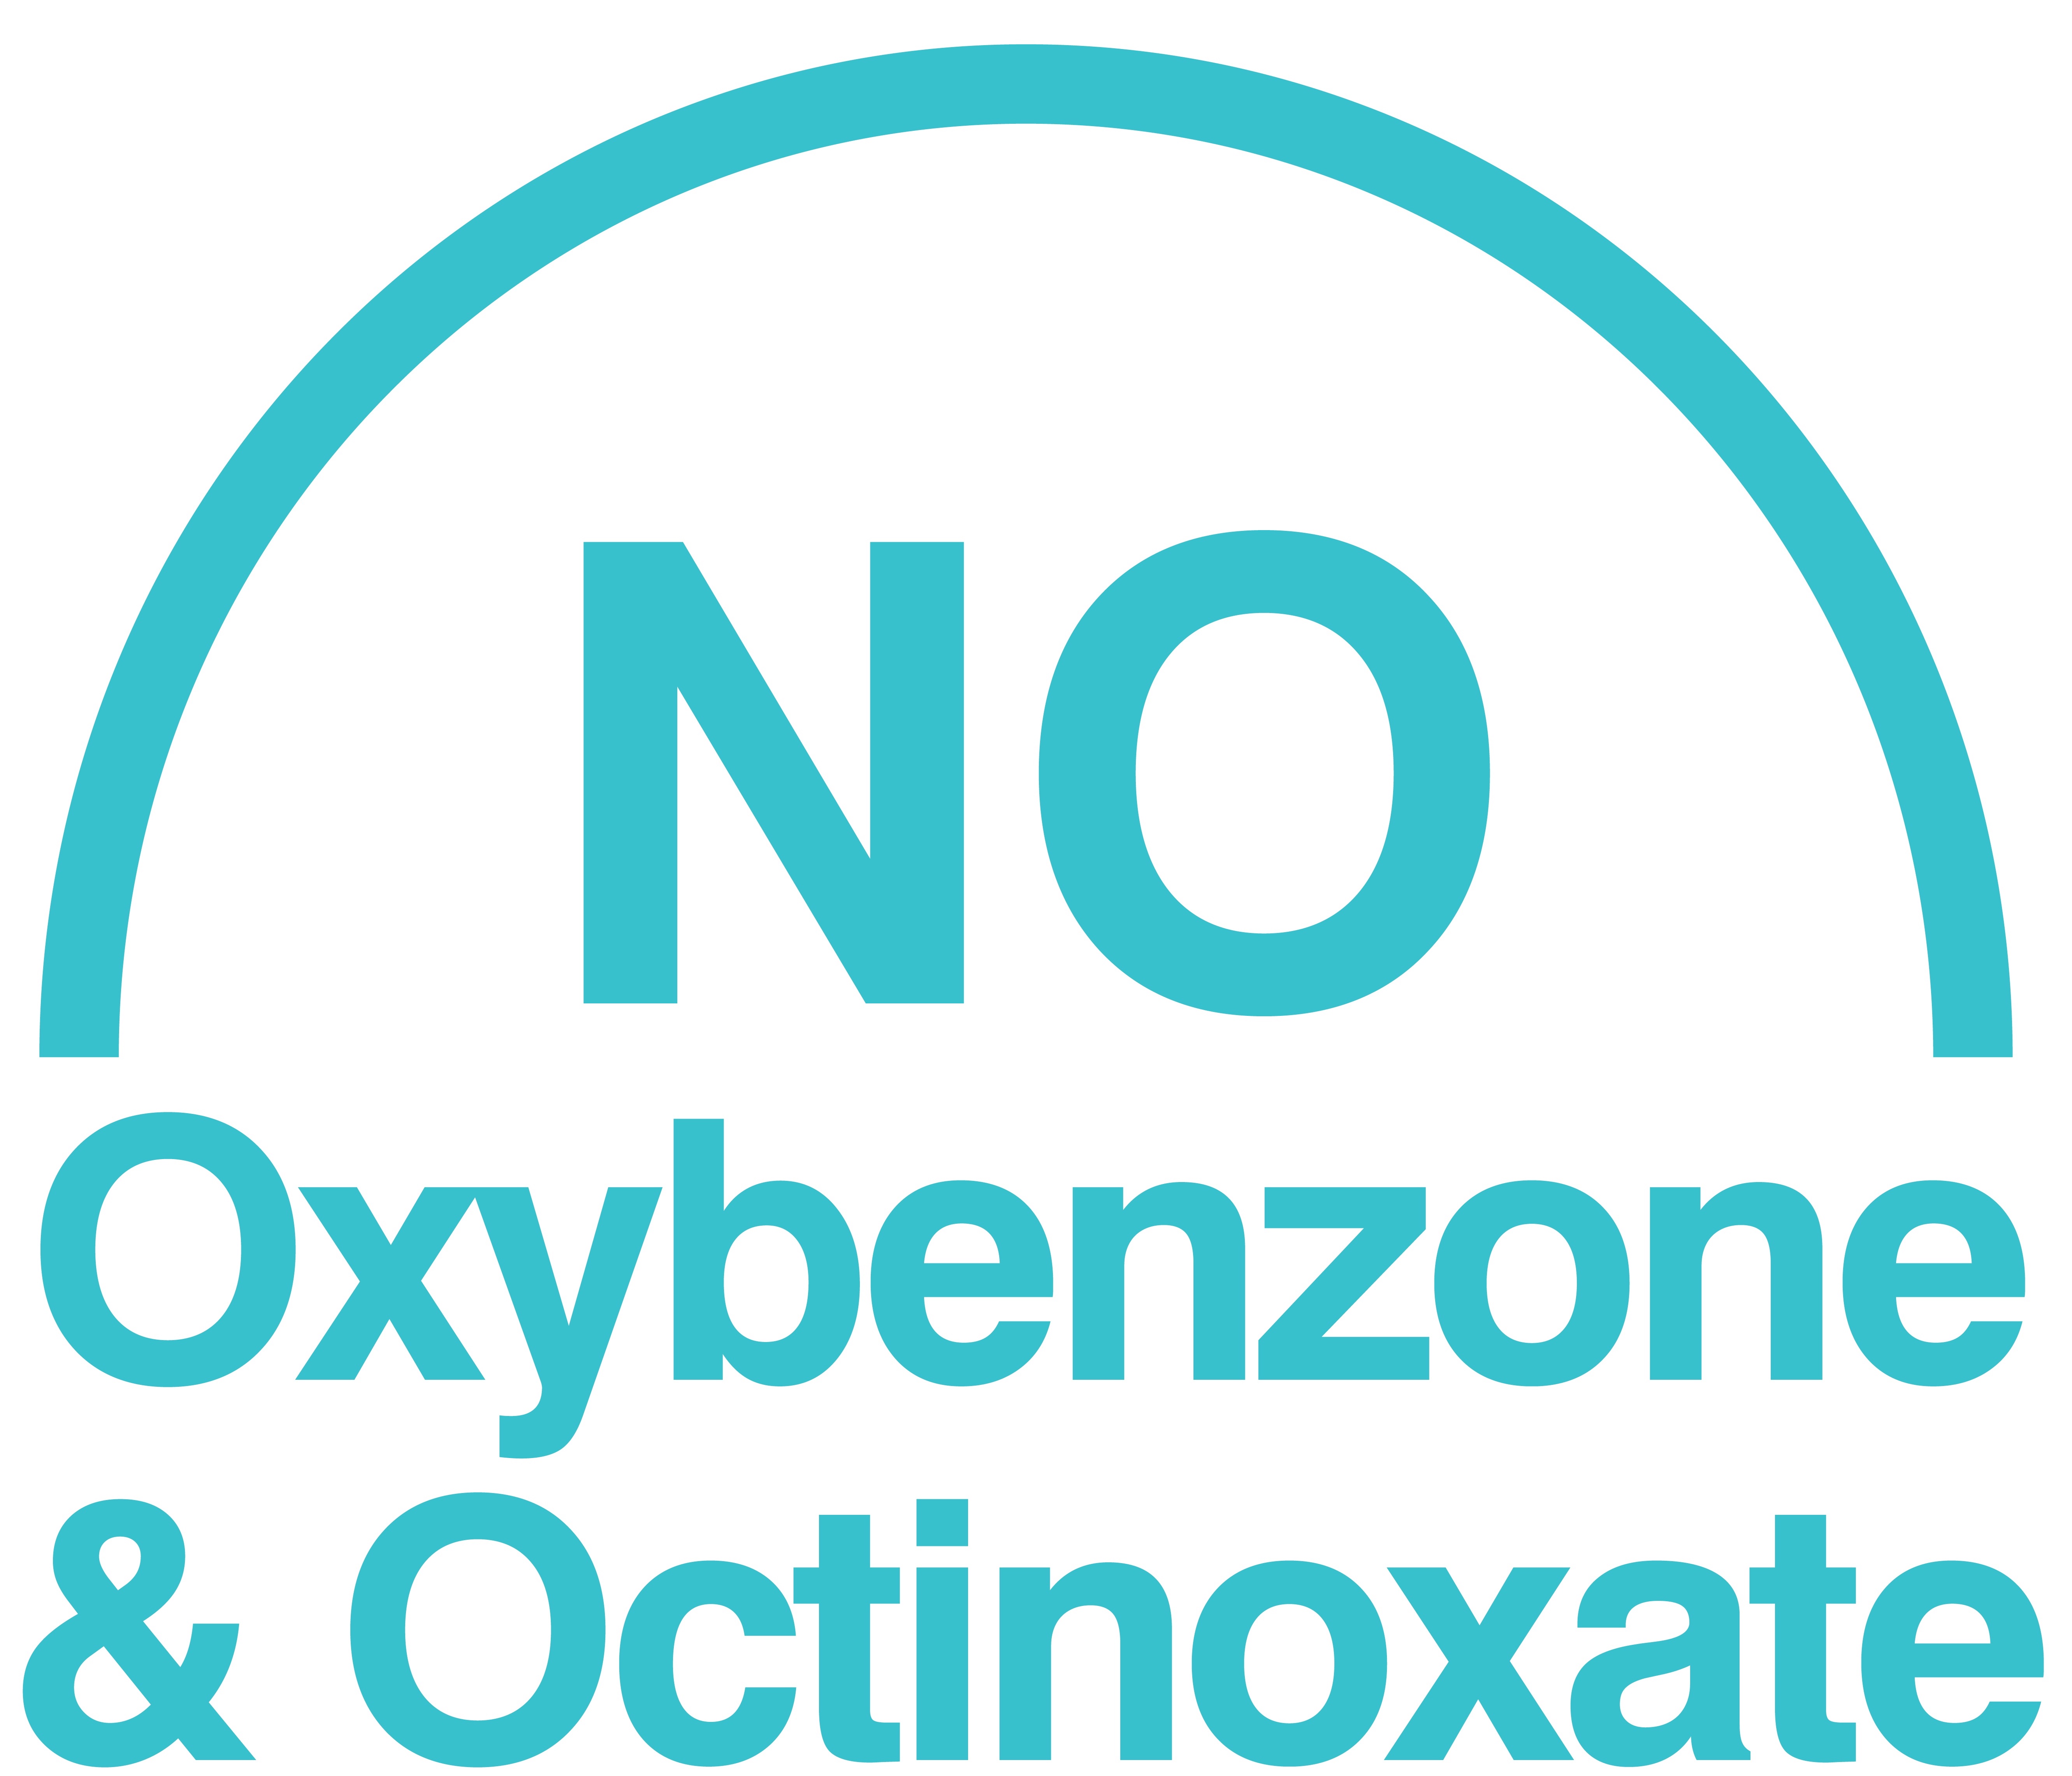 No_Oxybenzoone_Octinoxate_Blue_18_.jpg